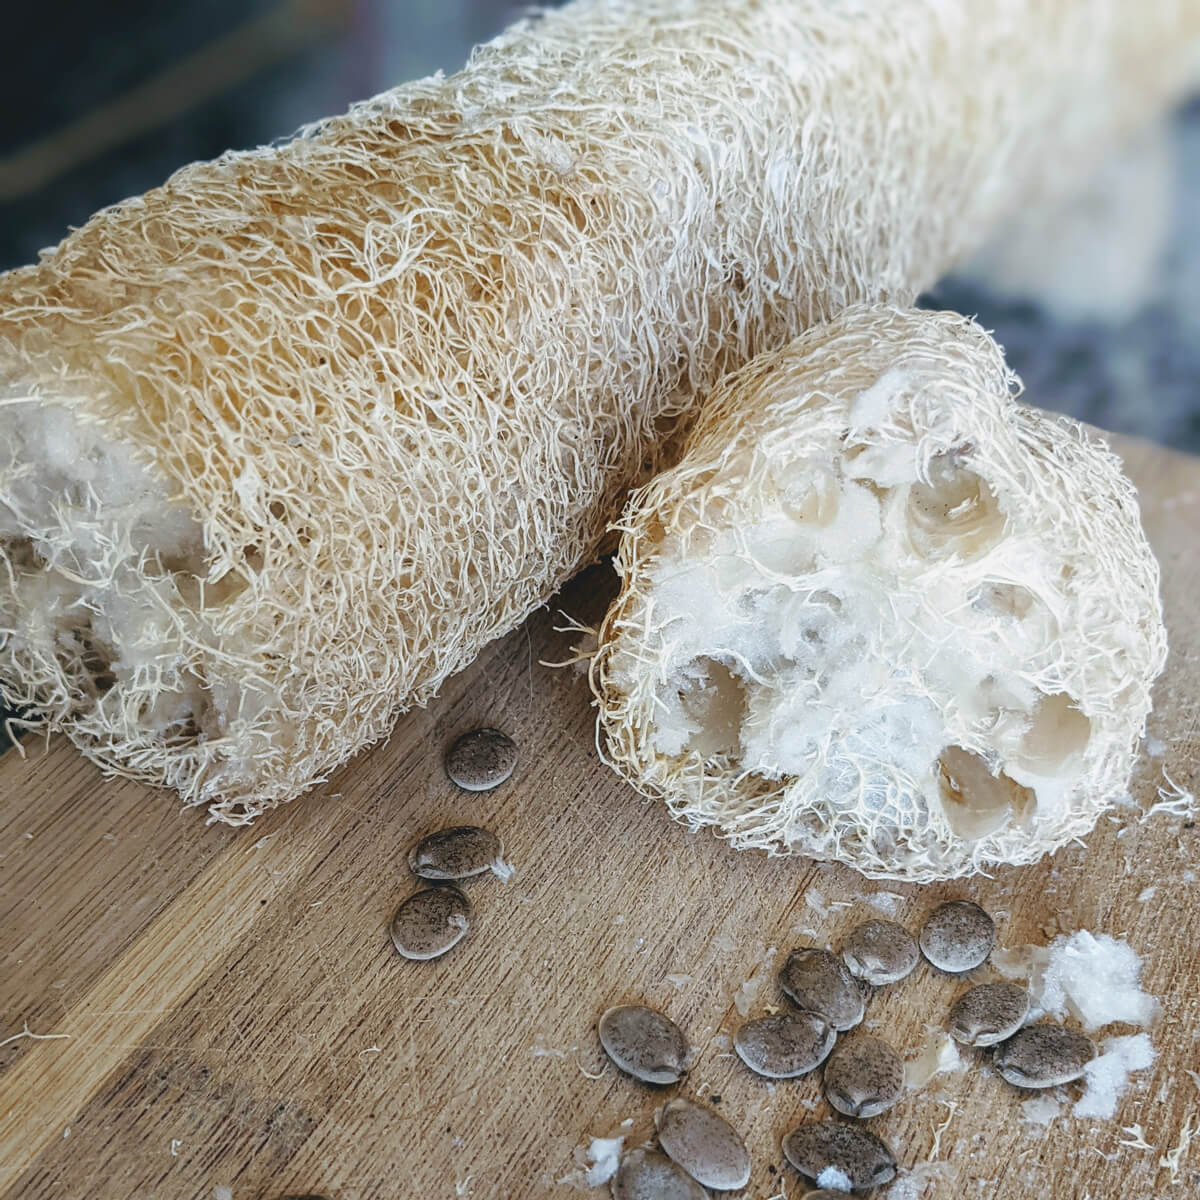 Grow your own loofah sponges for scrubbing and beauty! Sliced open luffa gourd with seeds spilling out